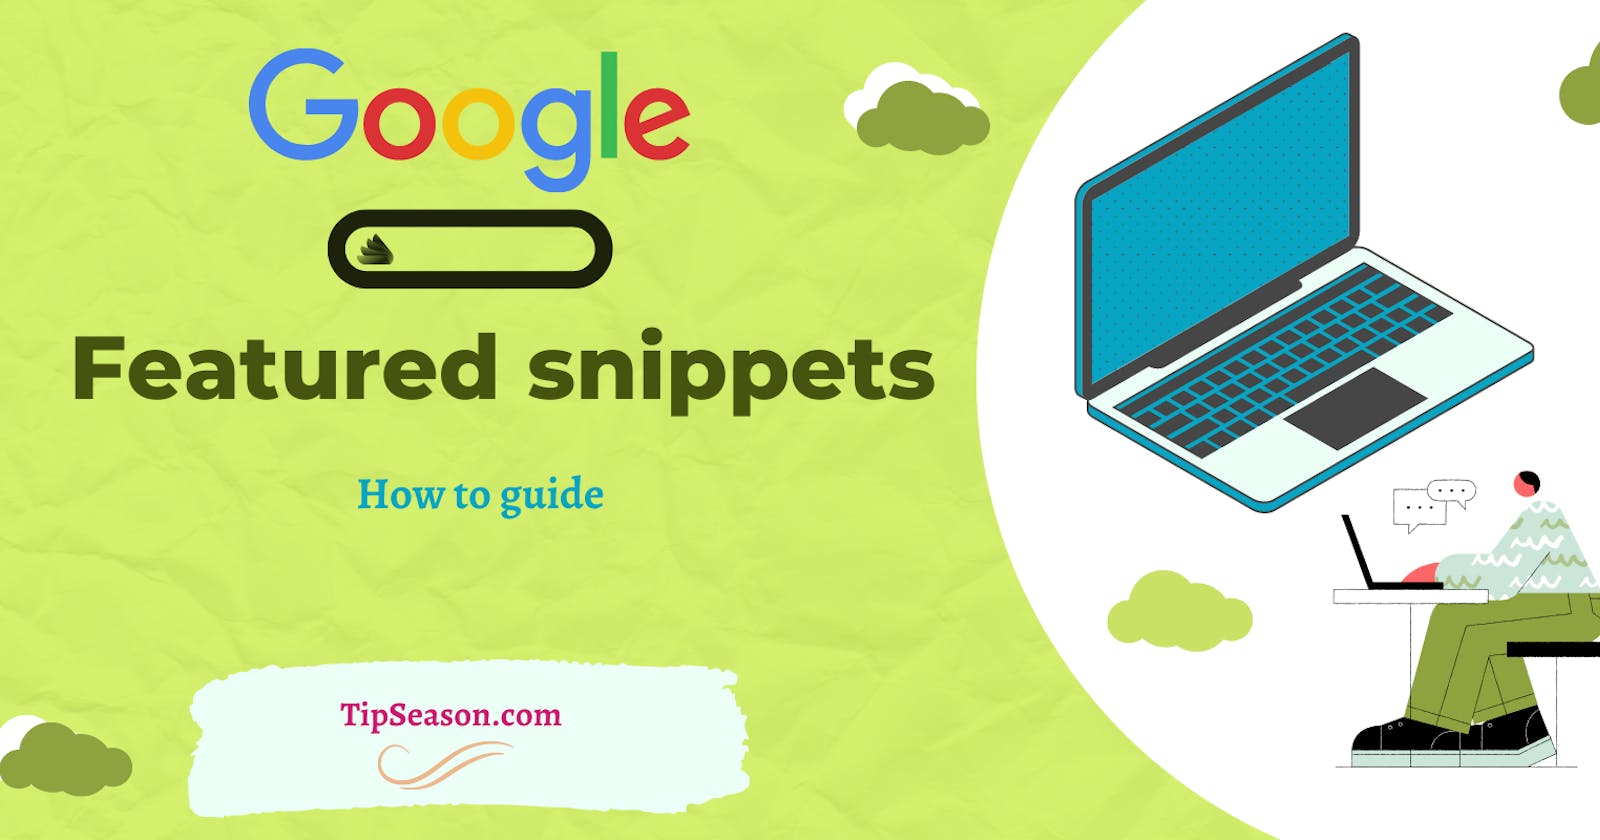 How to get featured on Google Search - Featured snippets